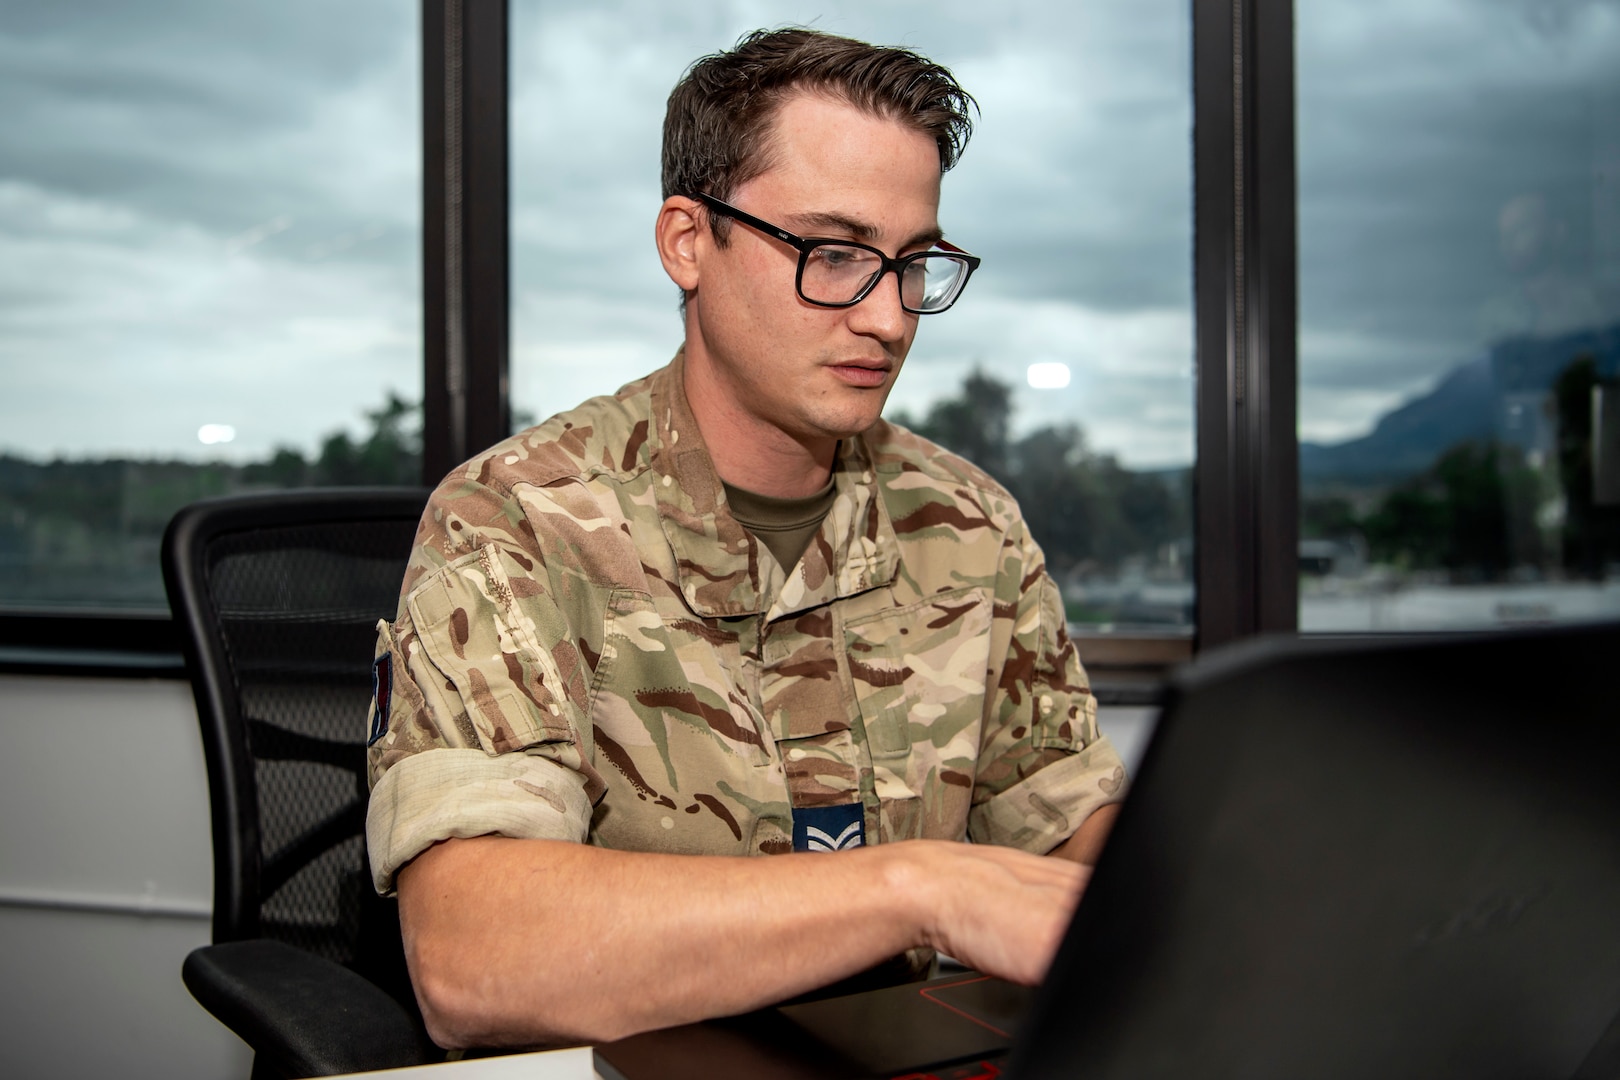 Man in United Kingdom military uniform wearing glasses, types on a laptop